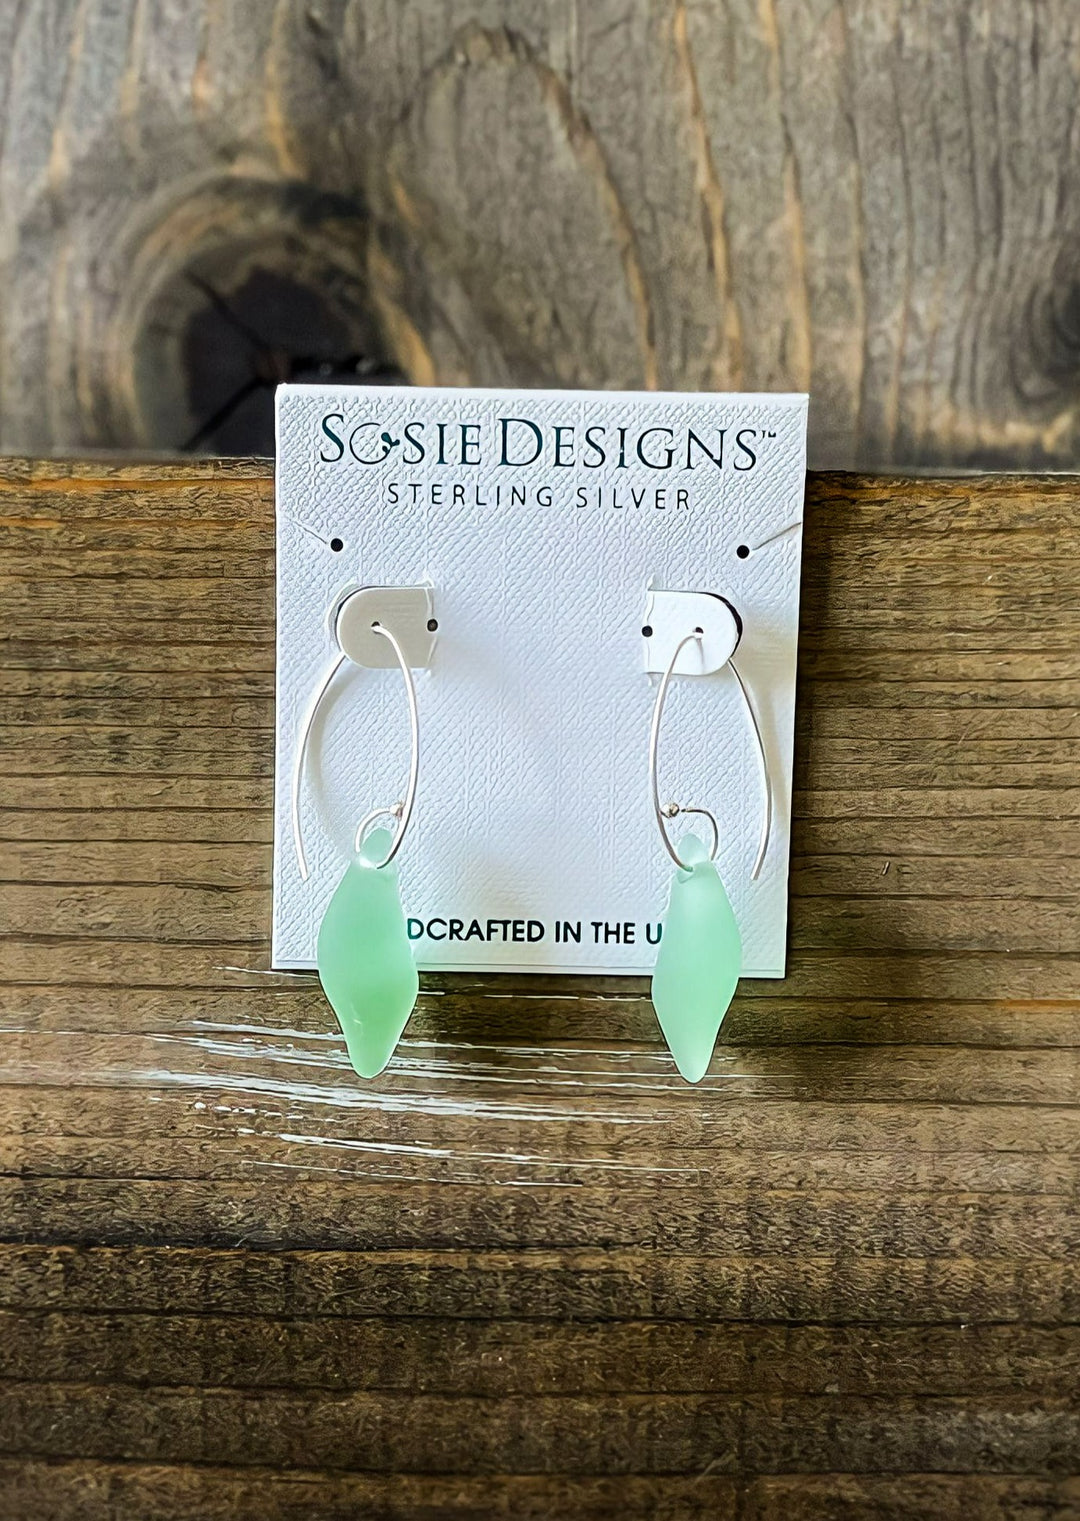 Sterling Silver Earrings | Green Eco Sea Splash Earrings | Made in the United States